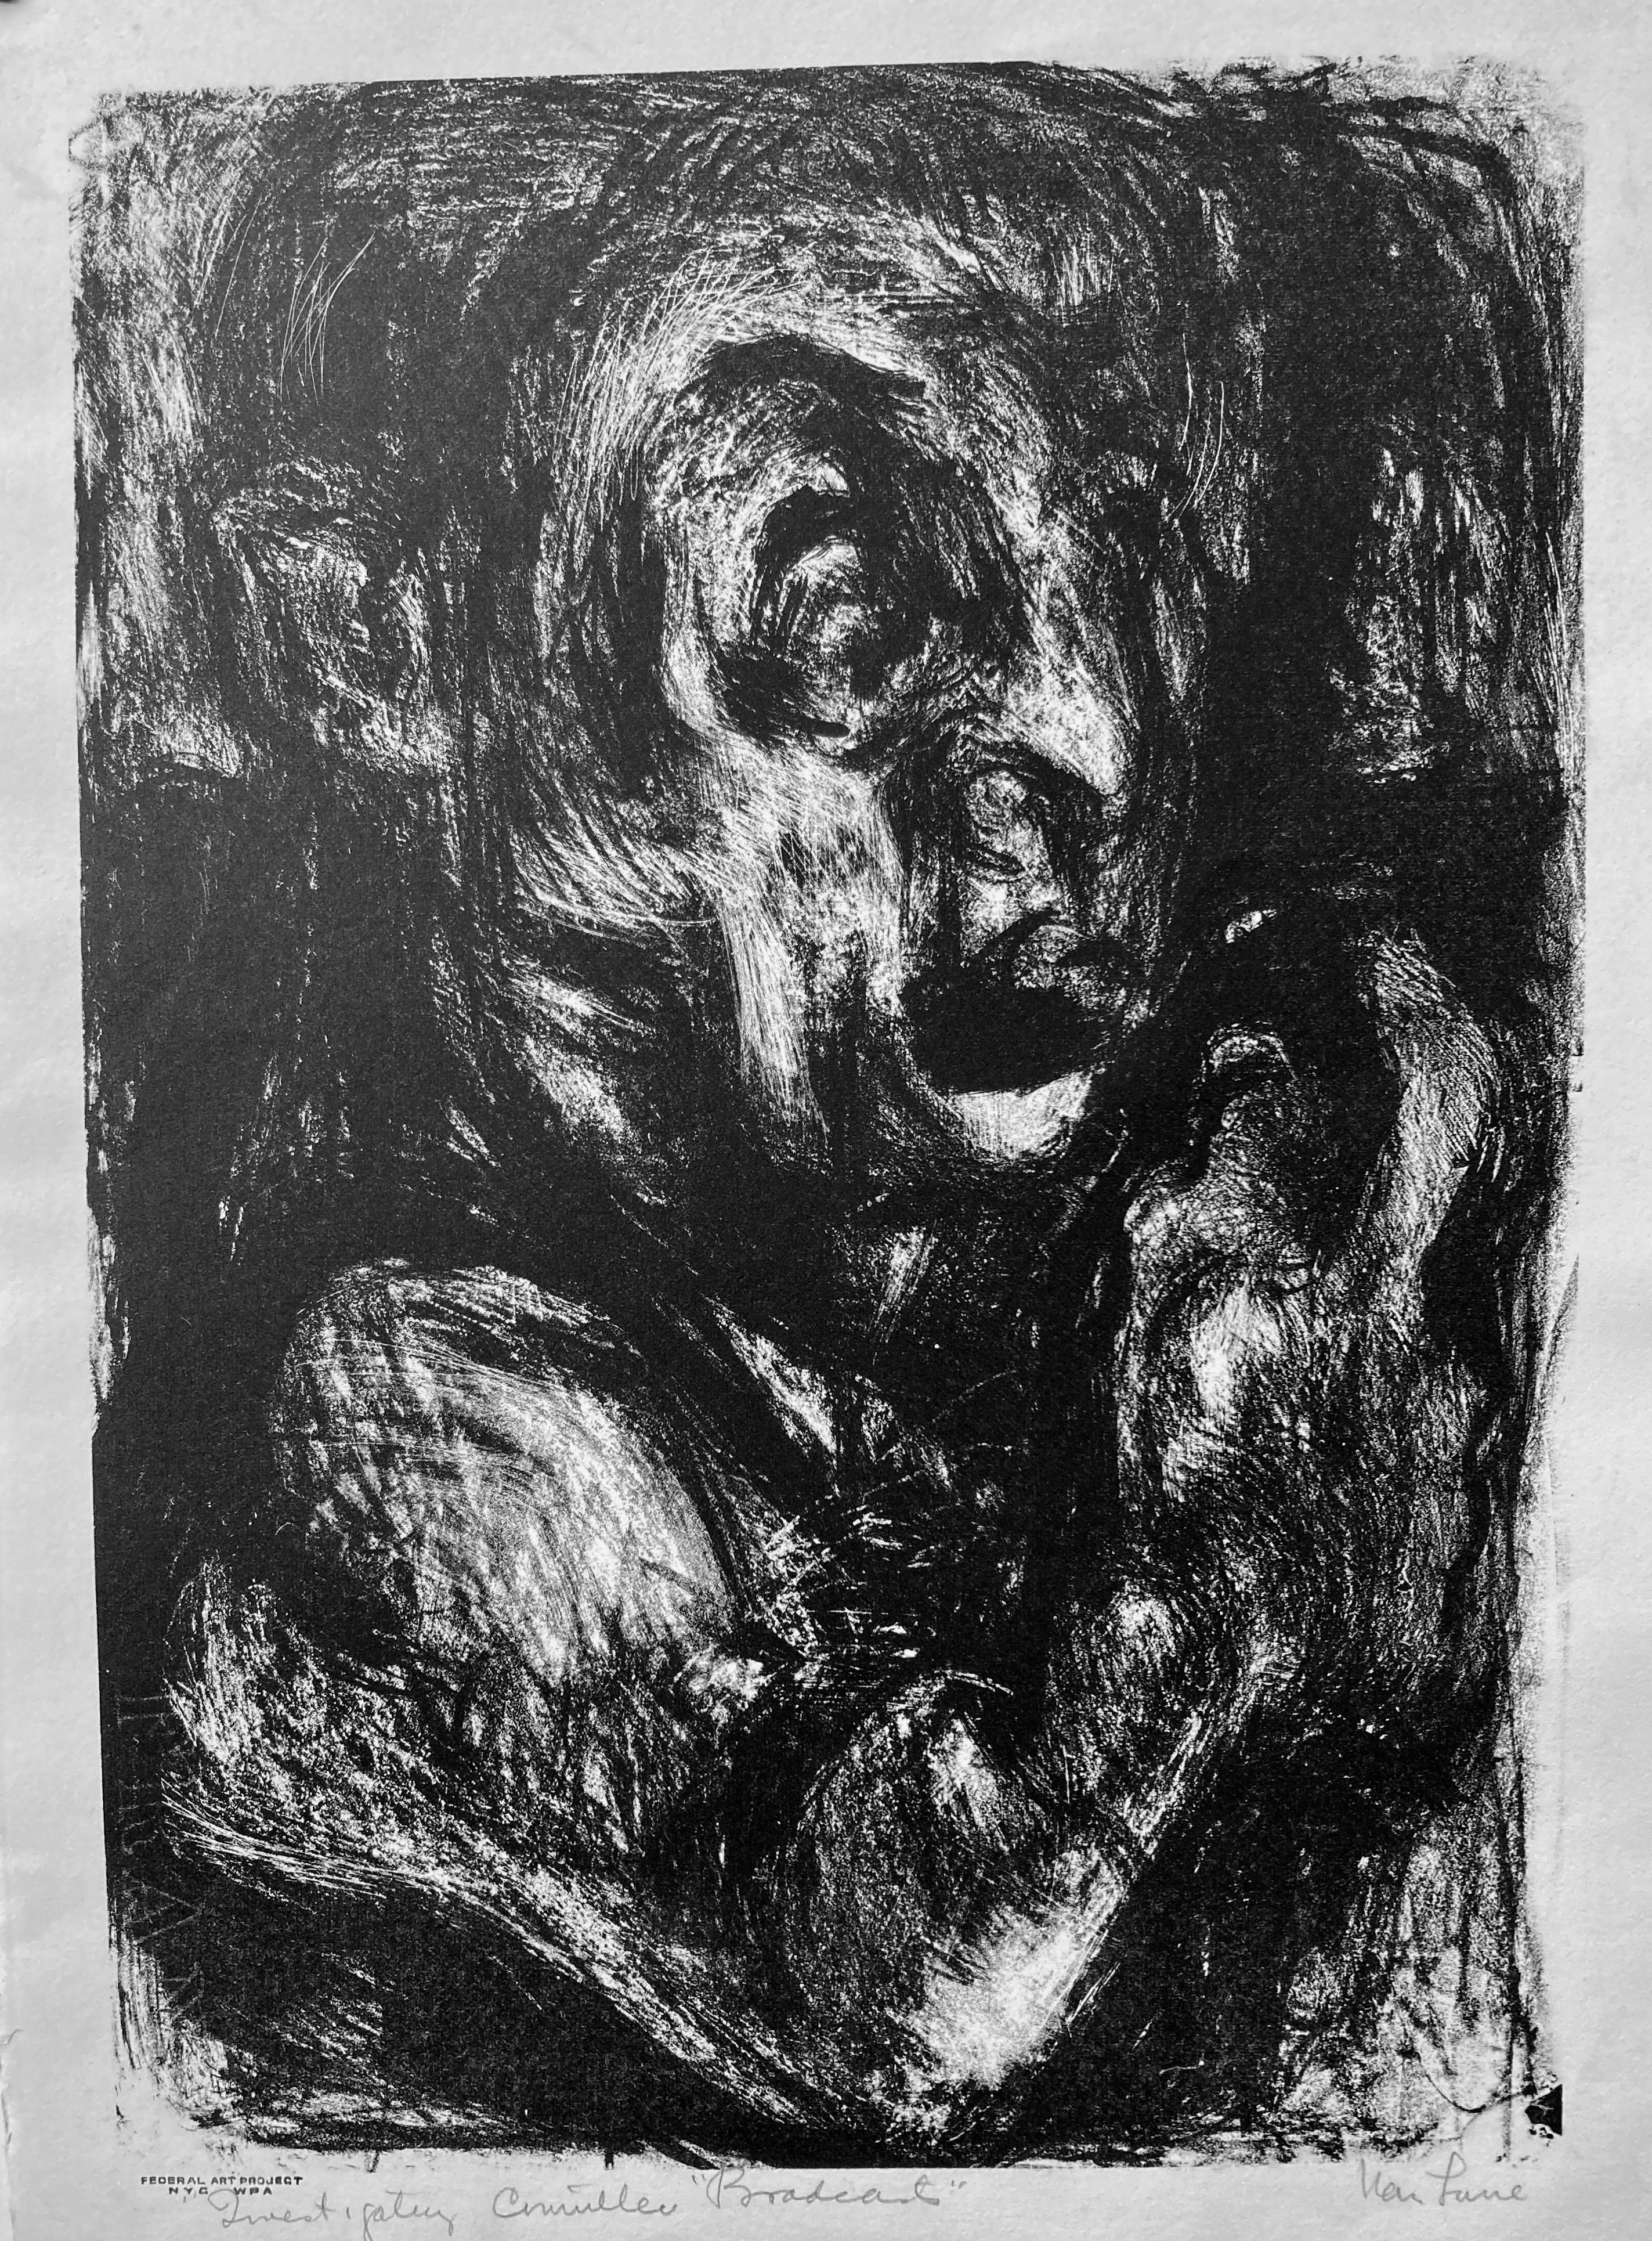 Nan Lurie Figurative Print - INVESTIGATING COMMITTEE BROADCAST - Published by WPA!